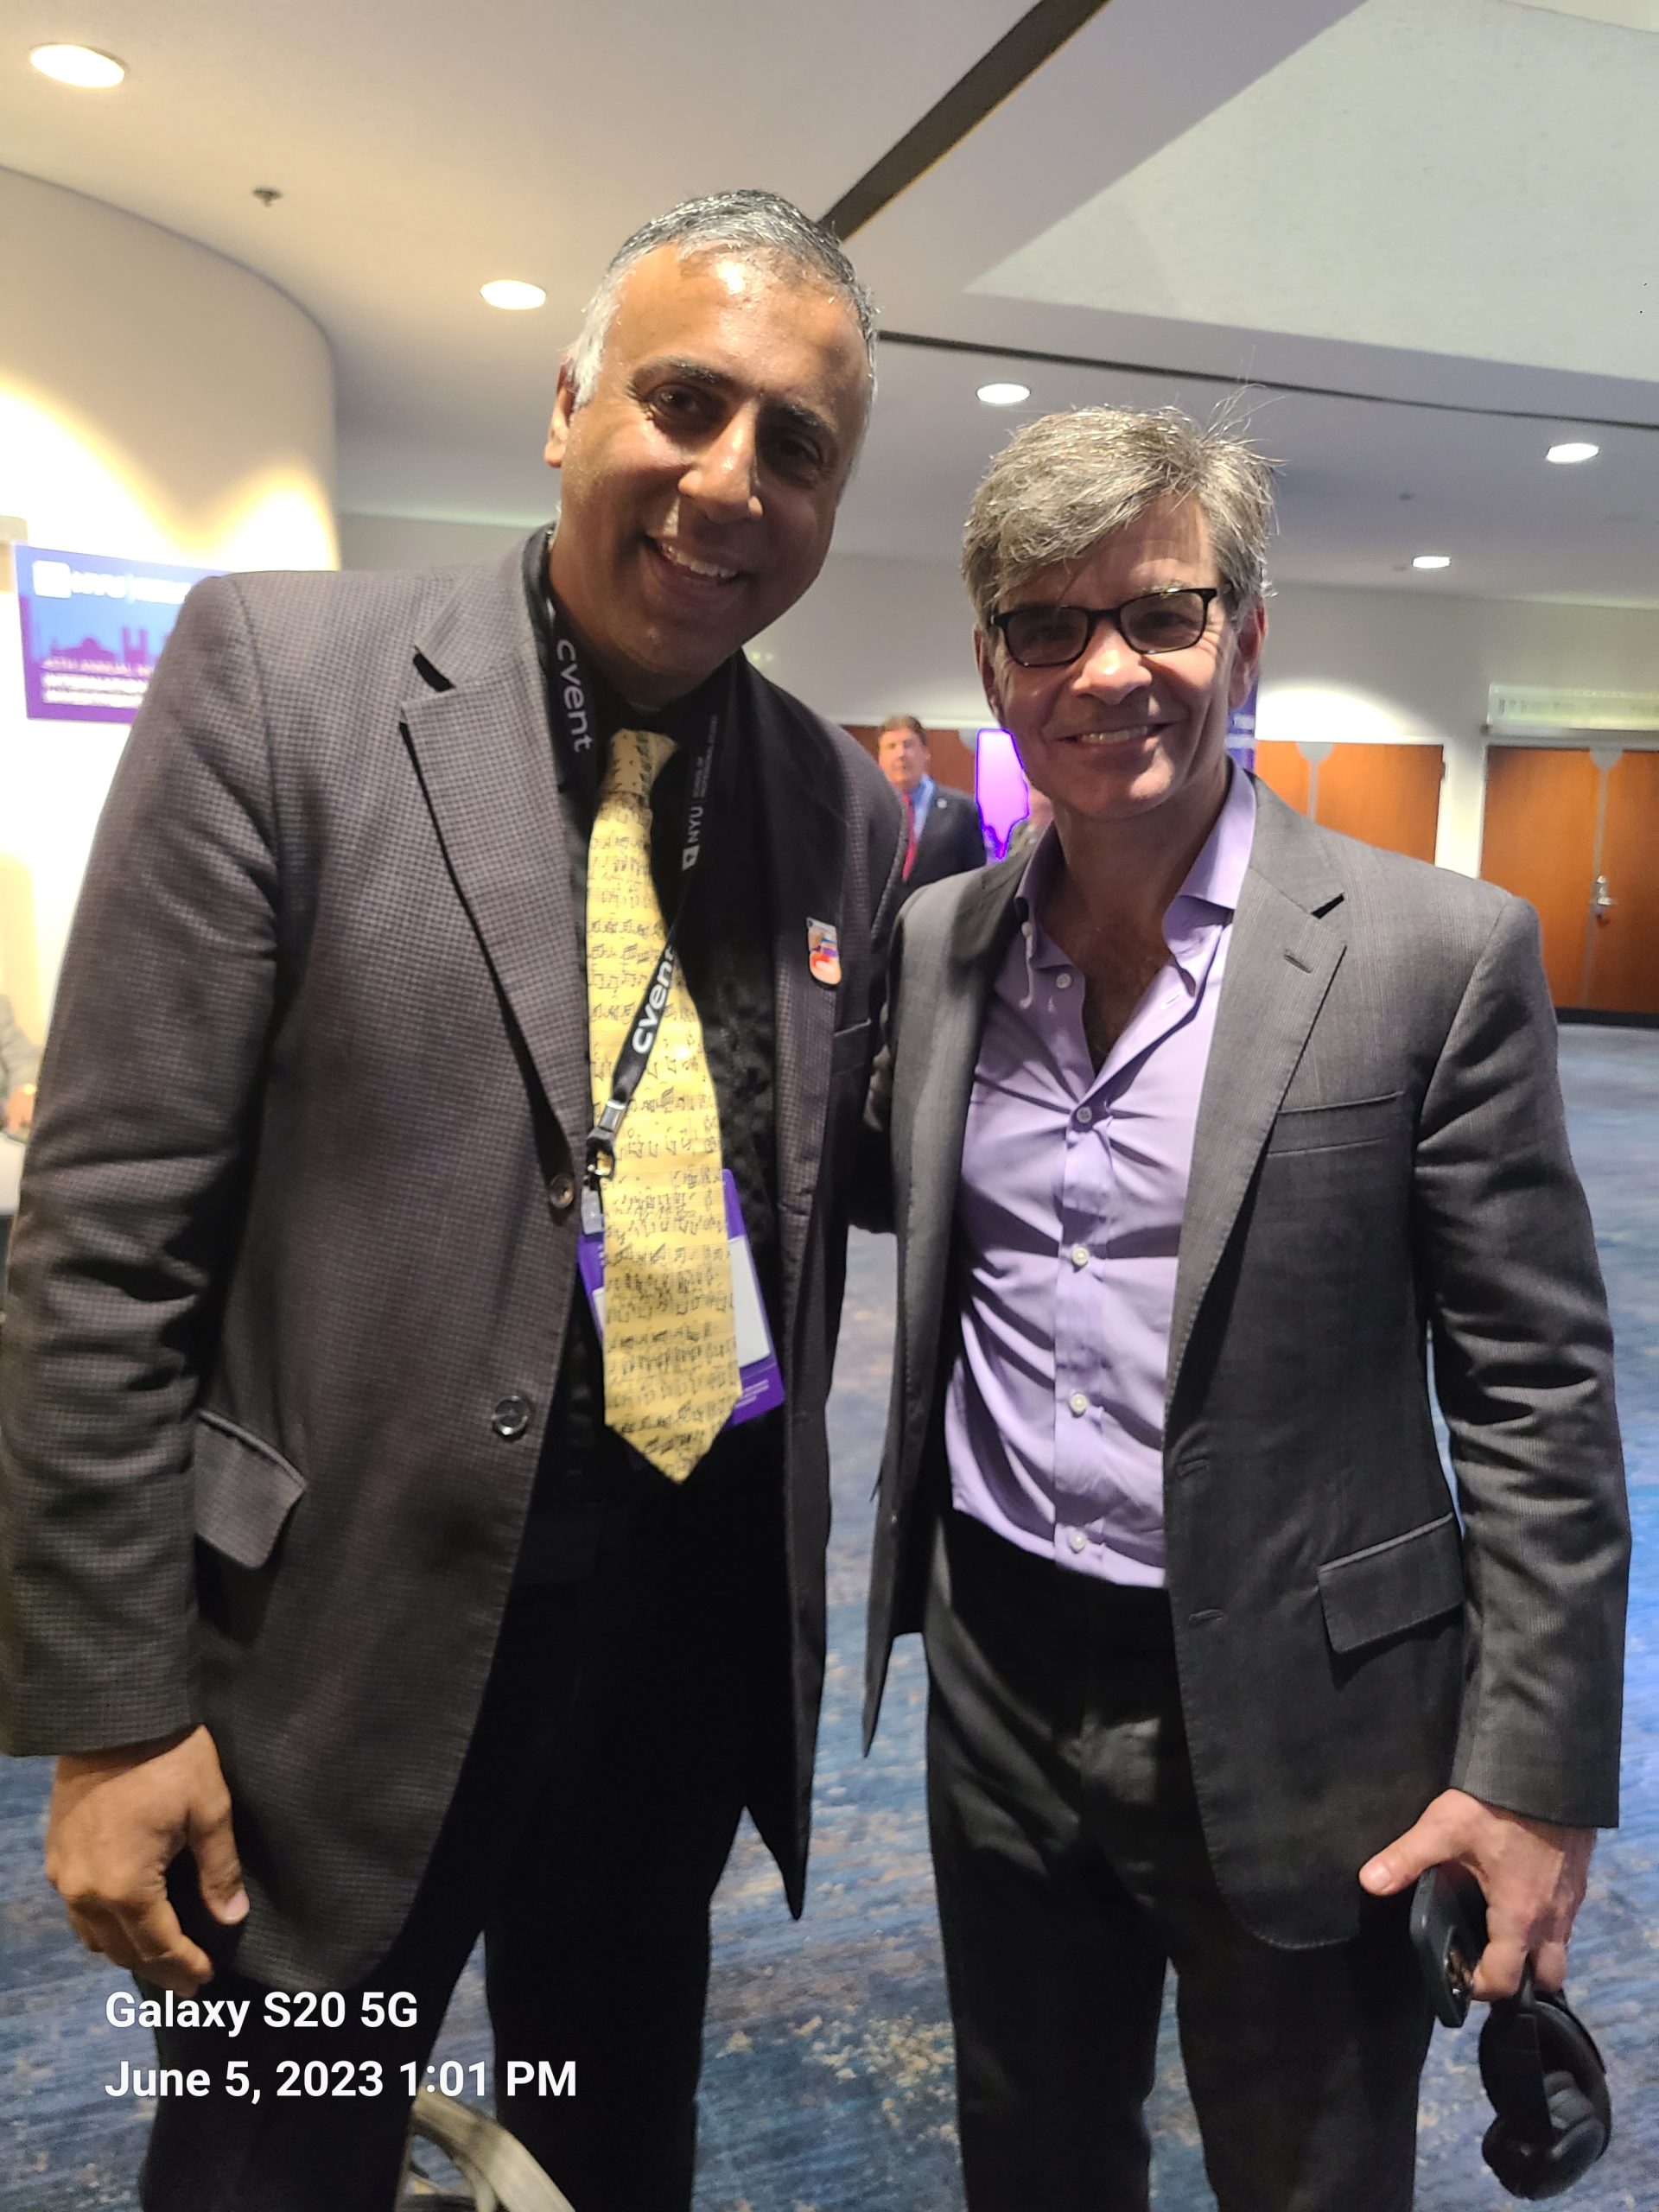 Dr Abbey with George Stephanopoulos Political Commentator